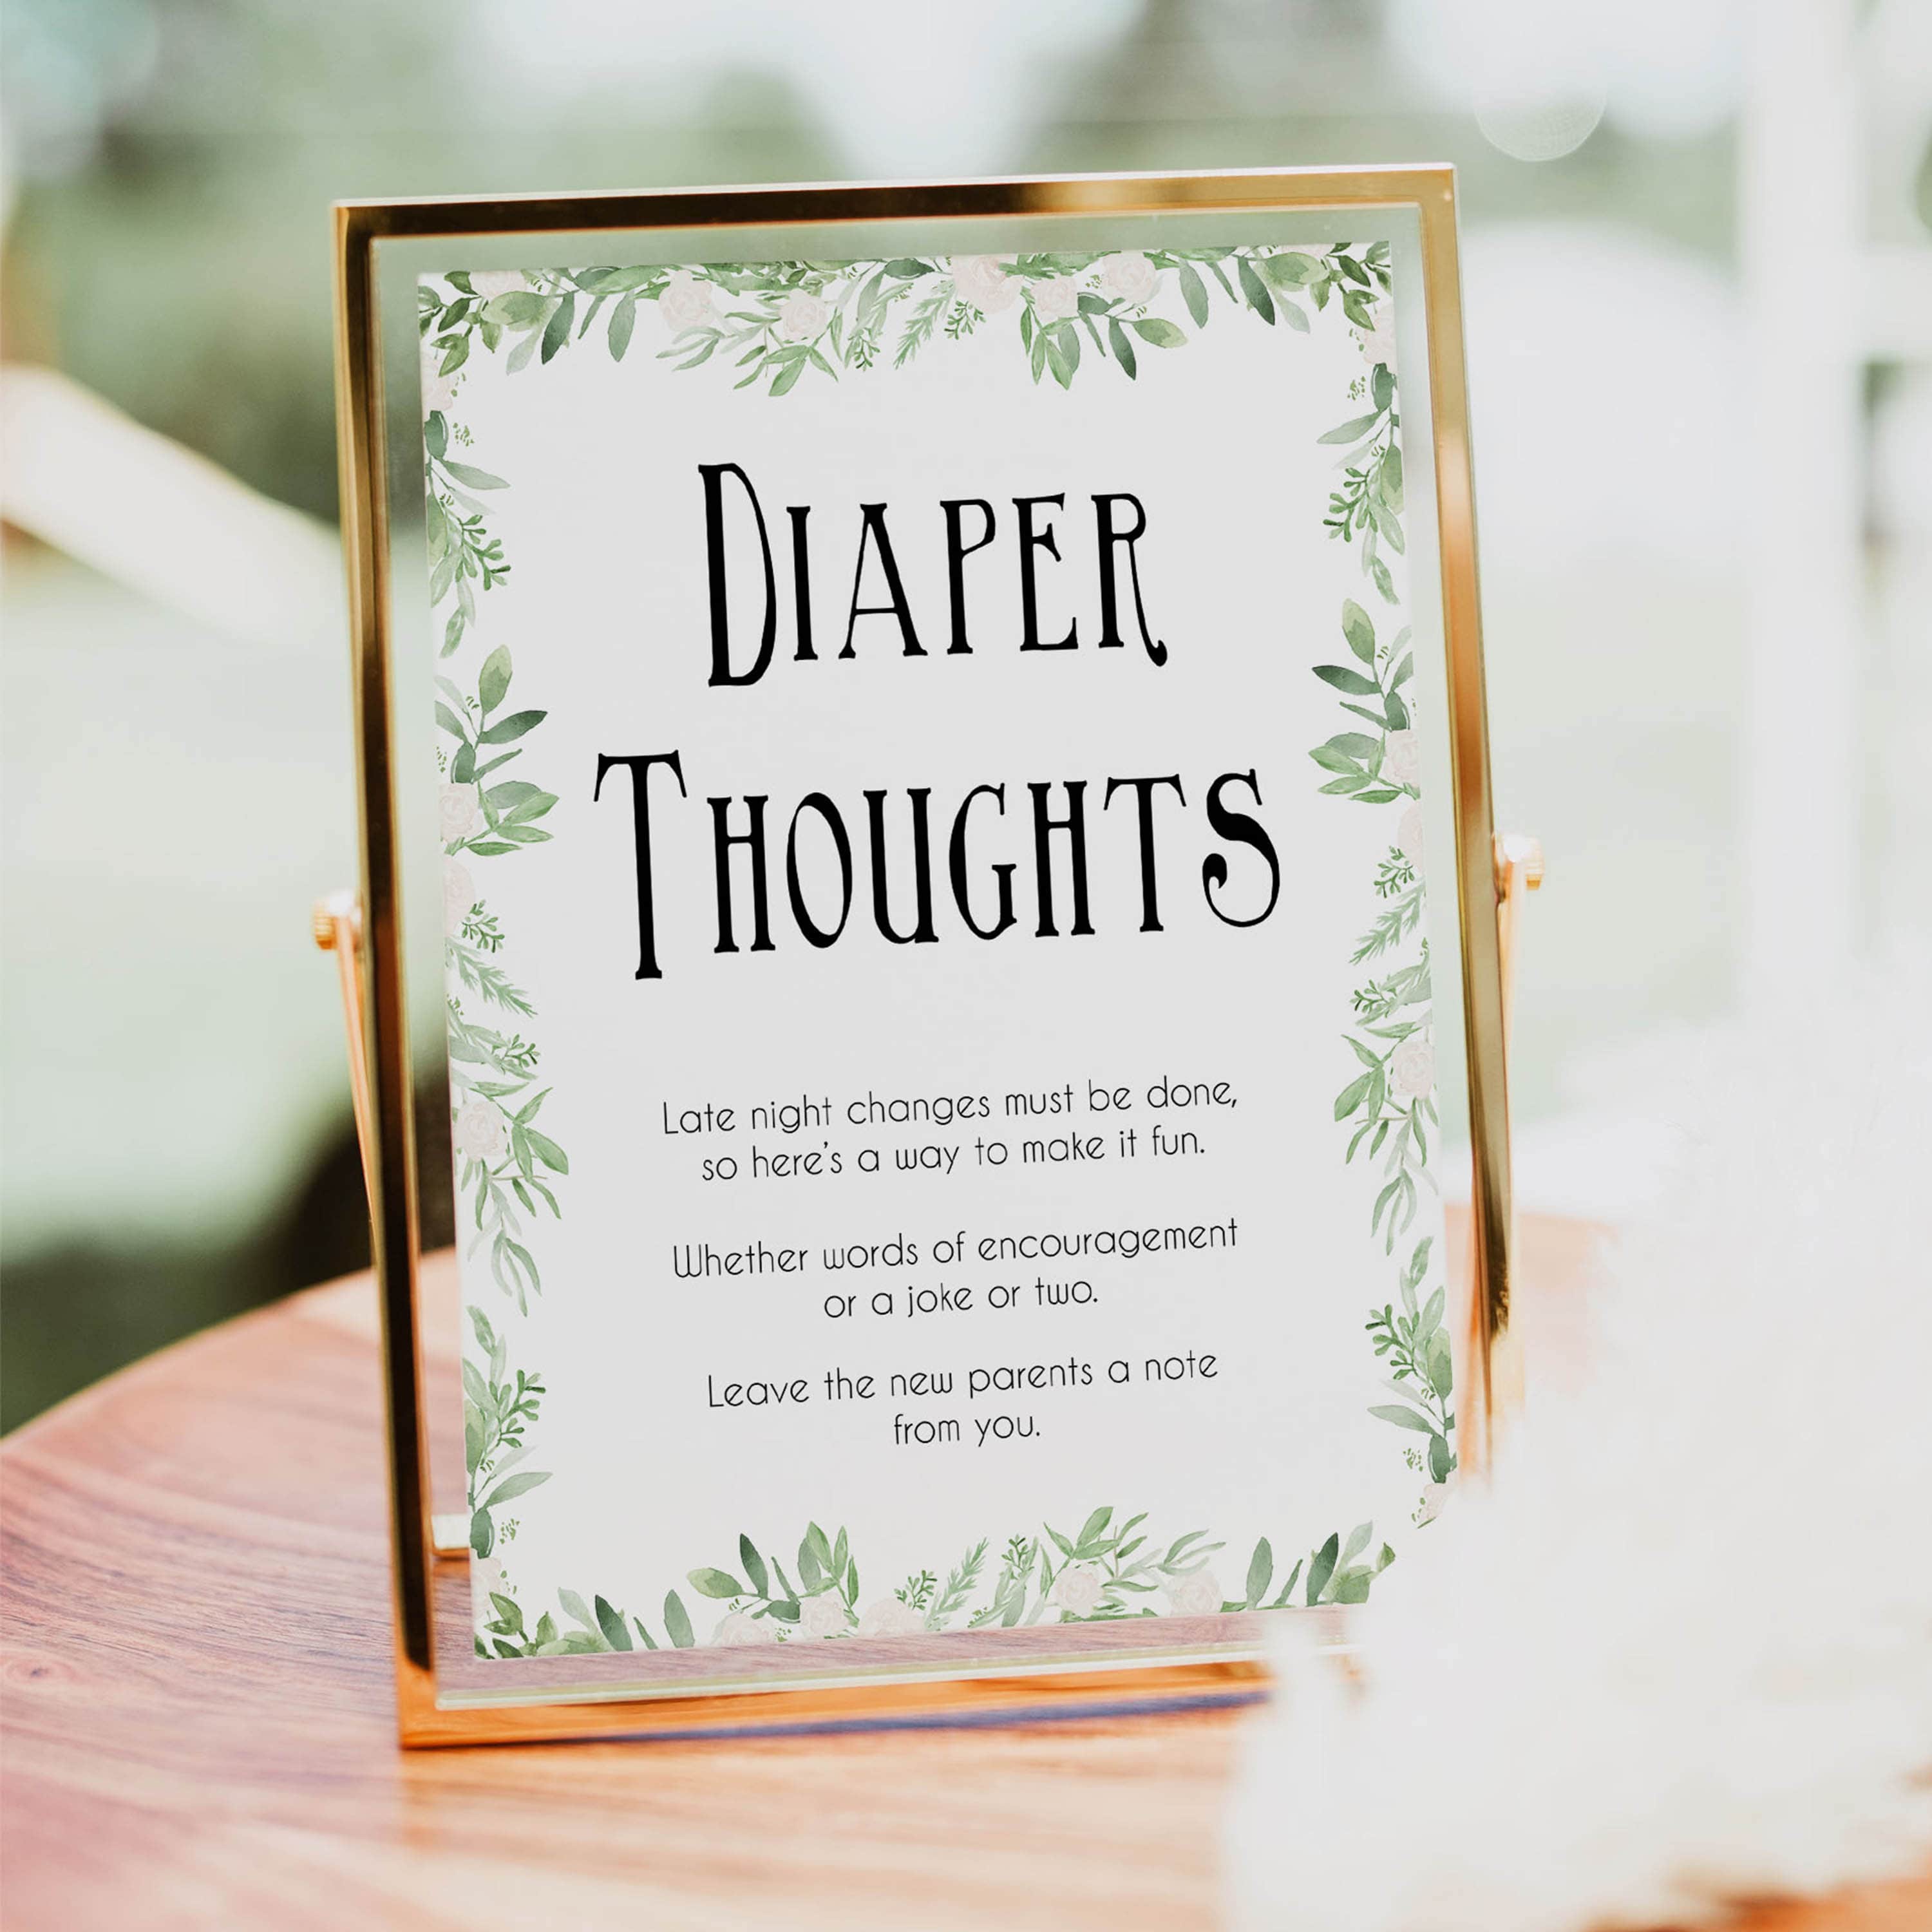 Diaper thoughts baby shower keepsake, diaper thoughts, nappy game, fun baby shower games, printable baby shower games, popular baby shower games